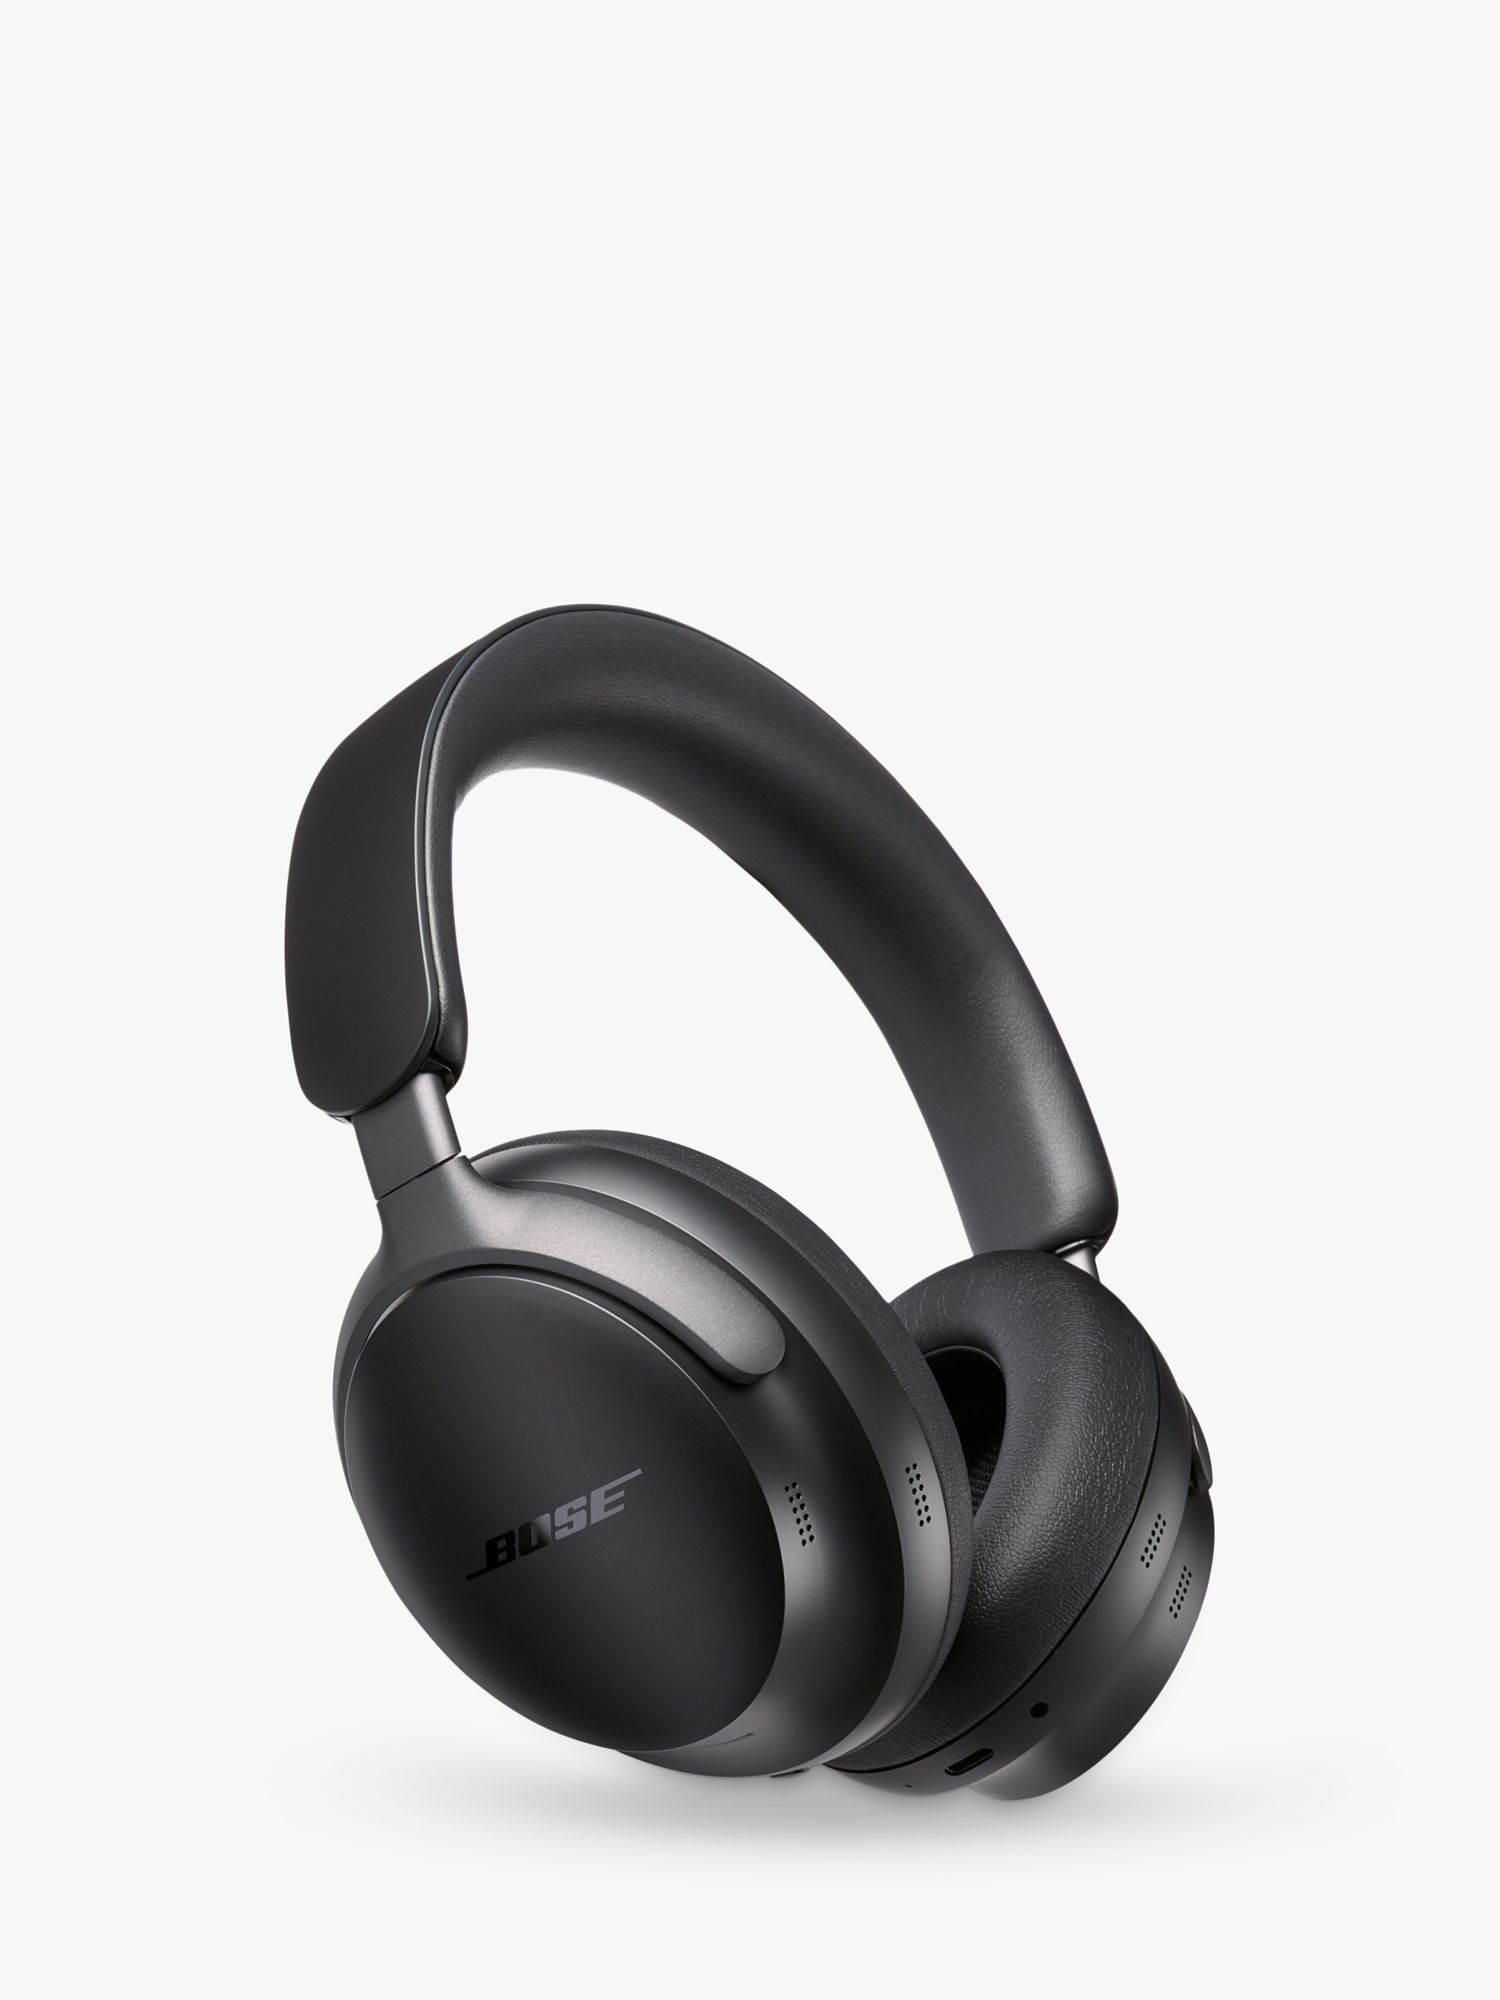 Bose QuietComfort Ultra Noise Cancelling Over-Ear Wireless